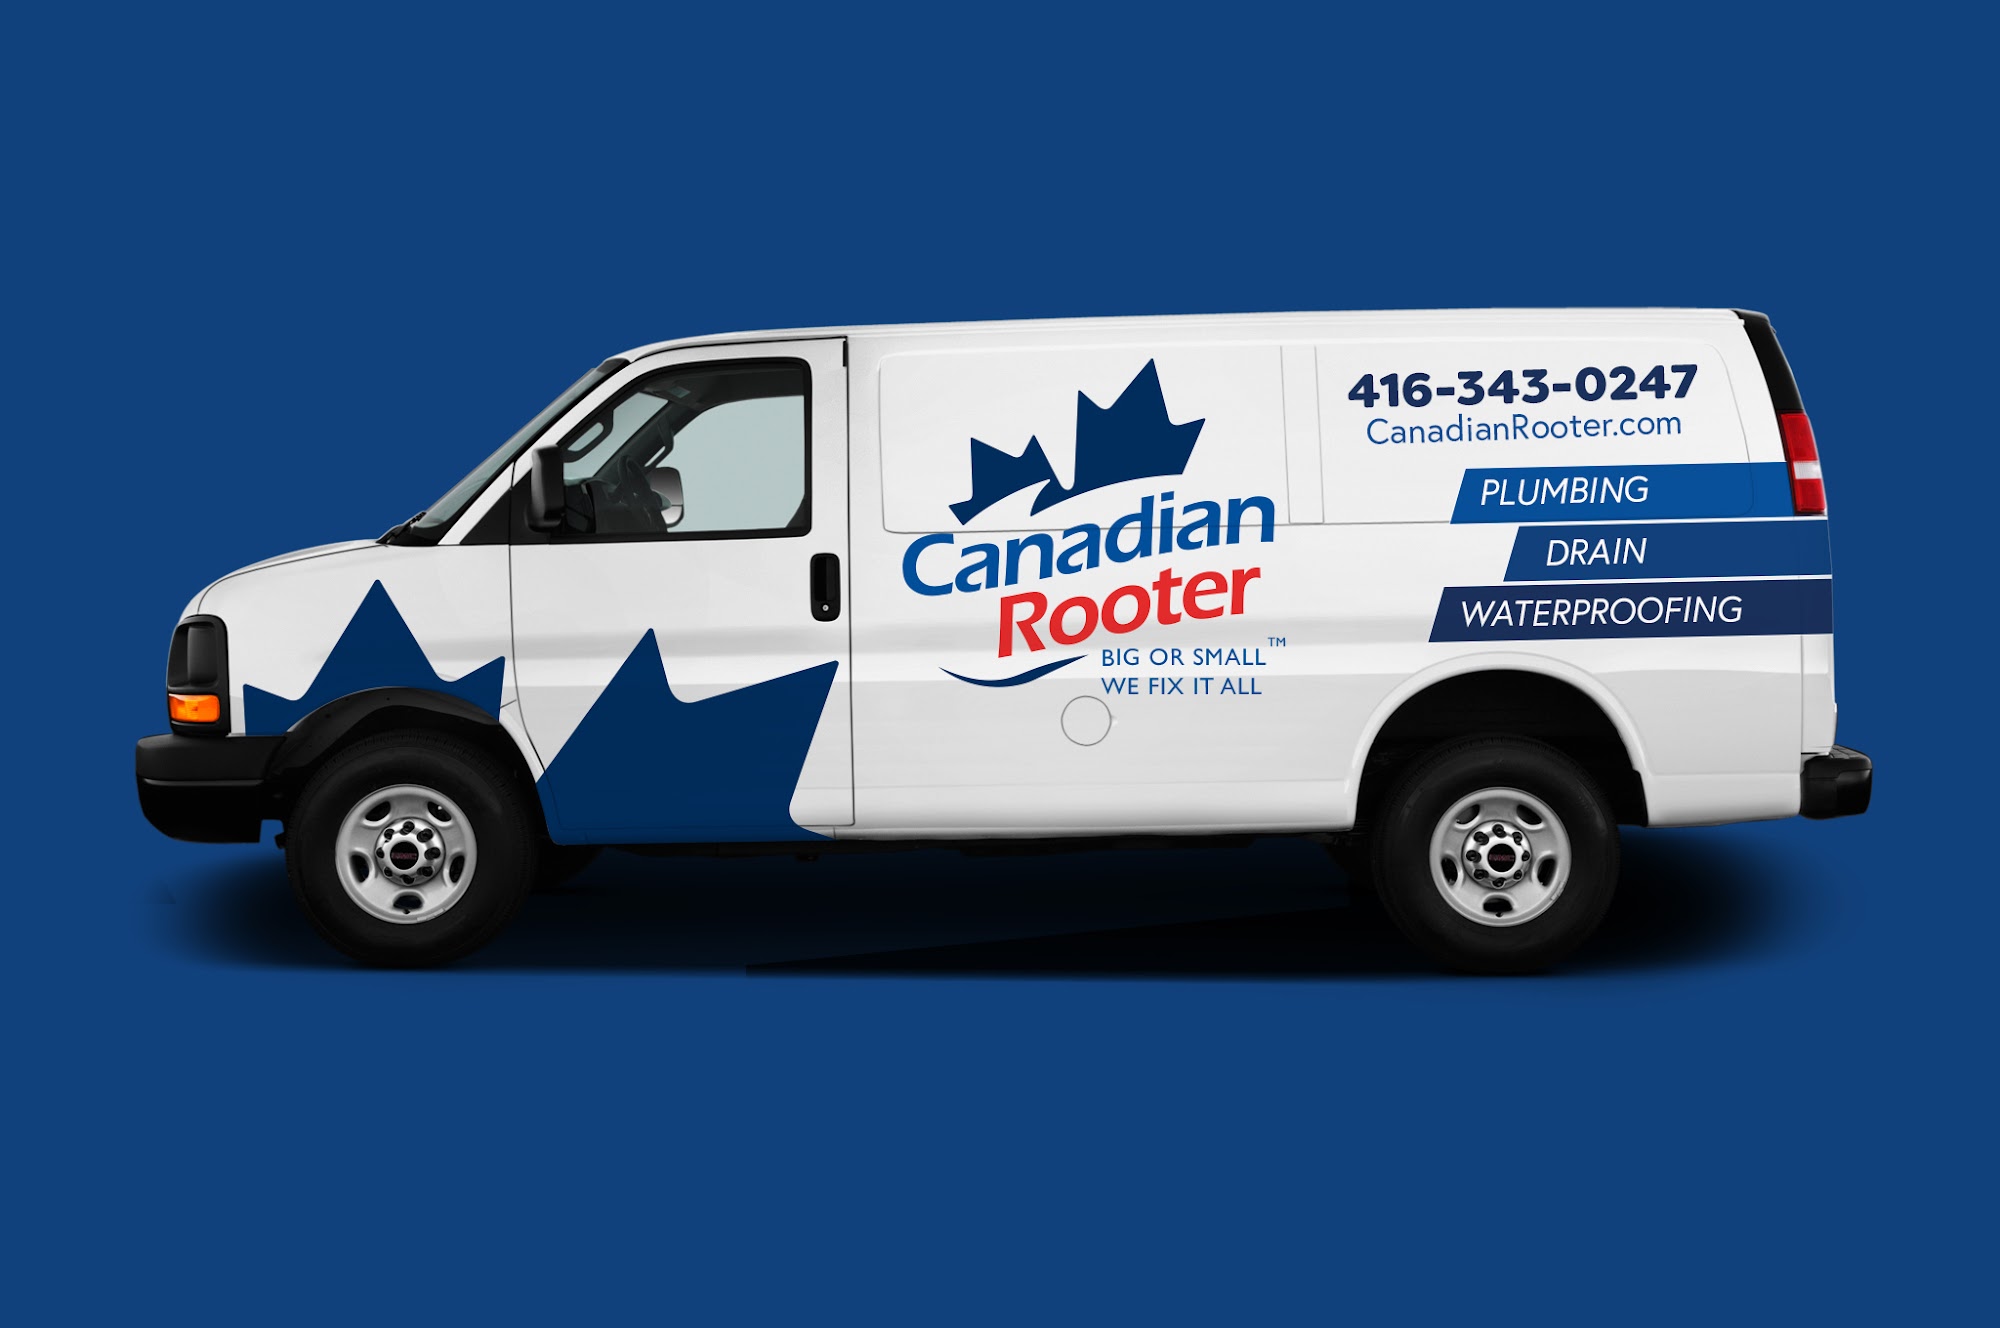 Canadian Rooter Toronto